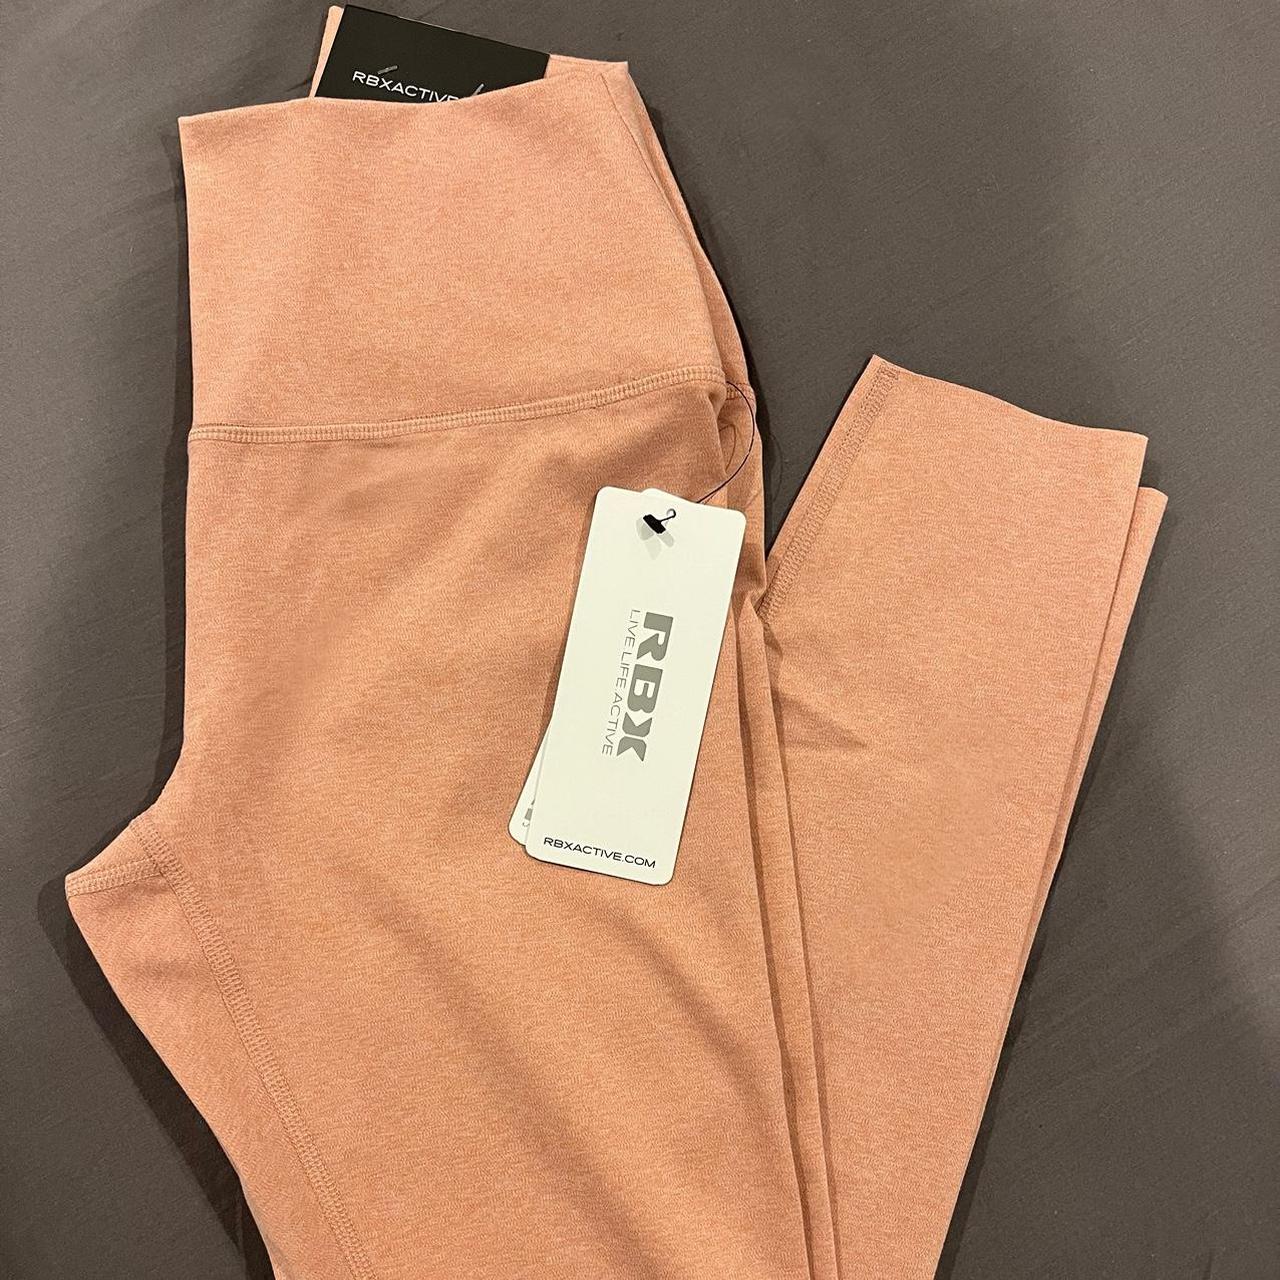 RBX active leggings Size small Peach/nude - Depop